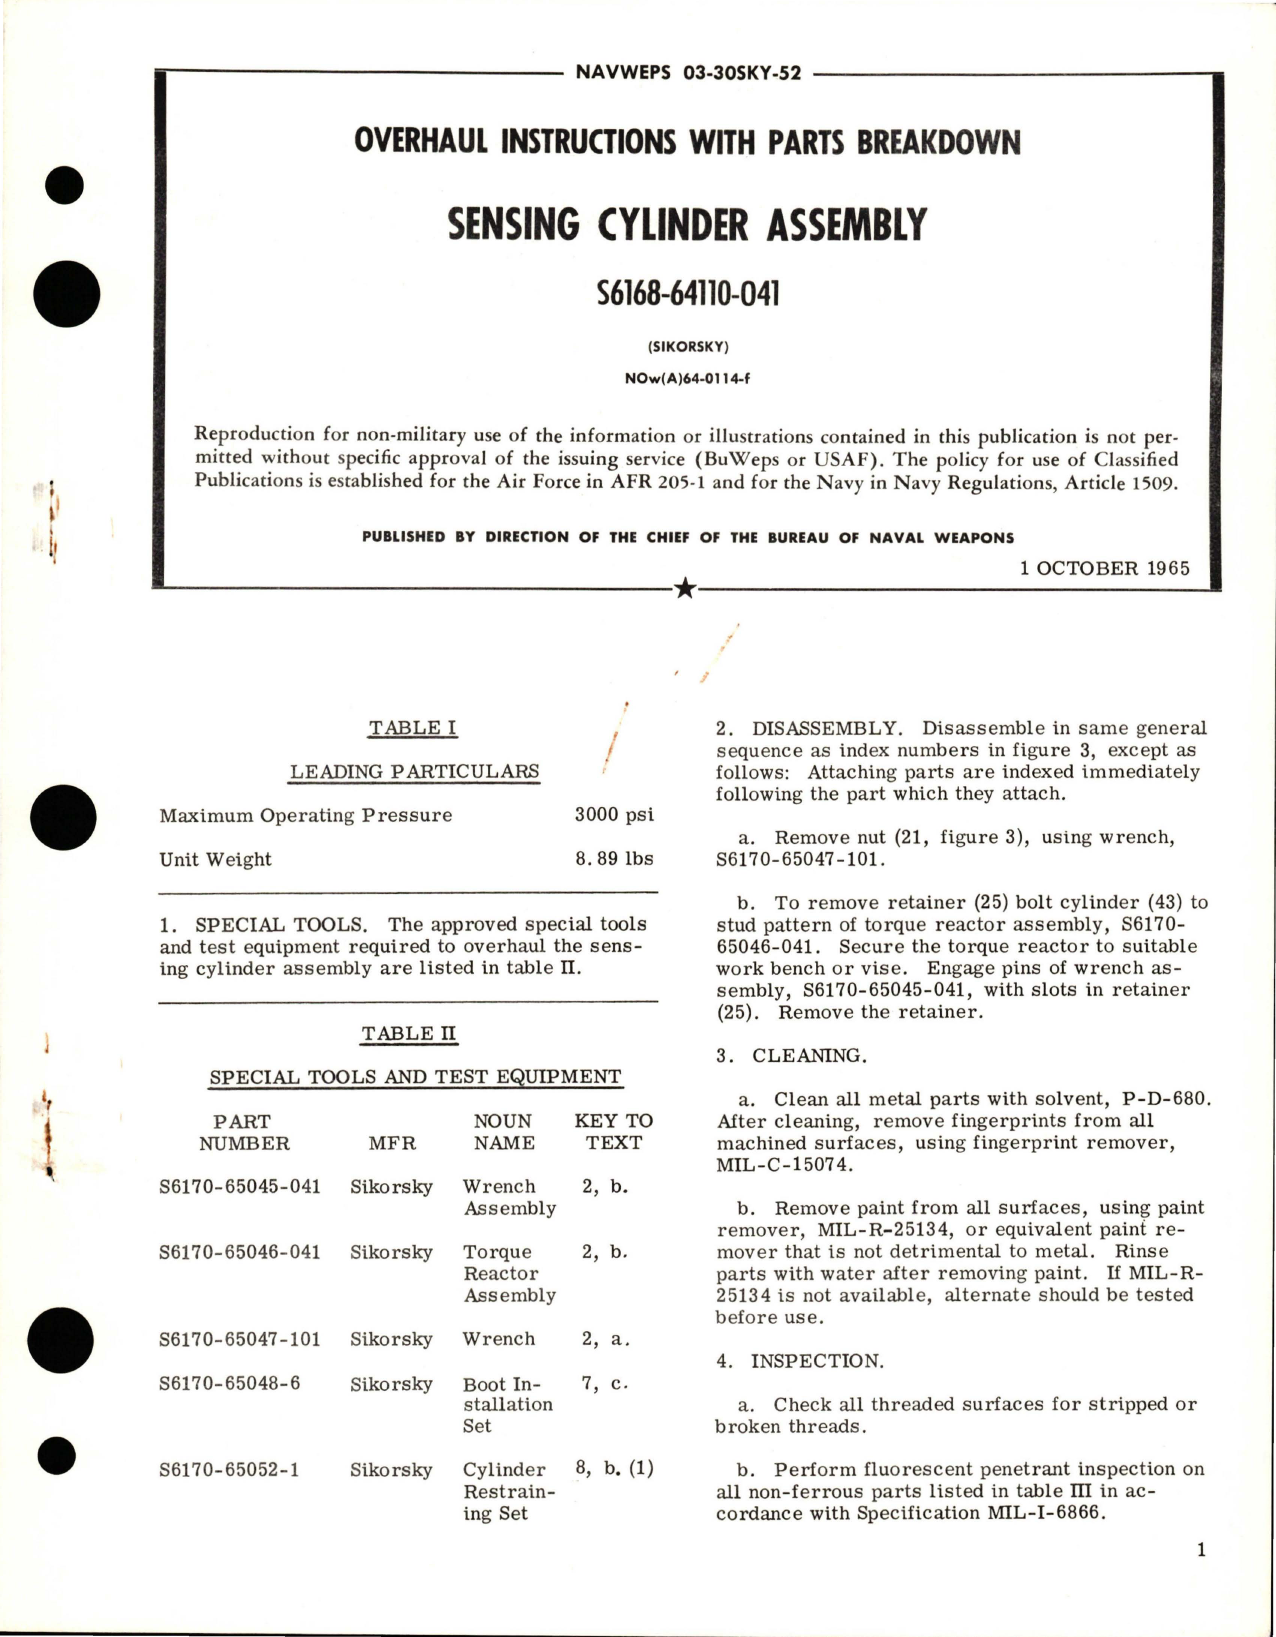 Sample page 1 from AirCorps Library document: Overhaul Instructions with Parts for Sensing Cylinder Assembly - S6168-64110-041